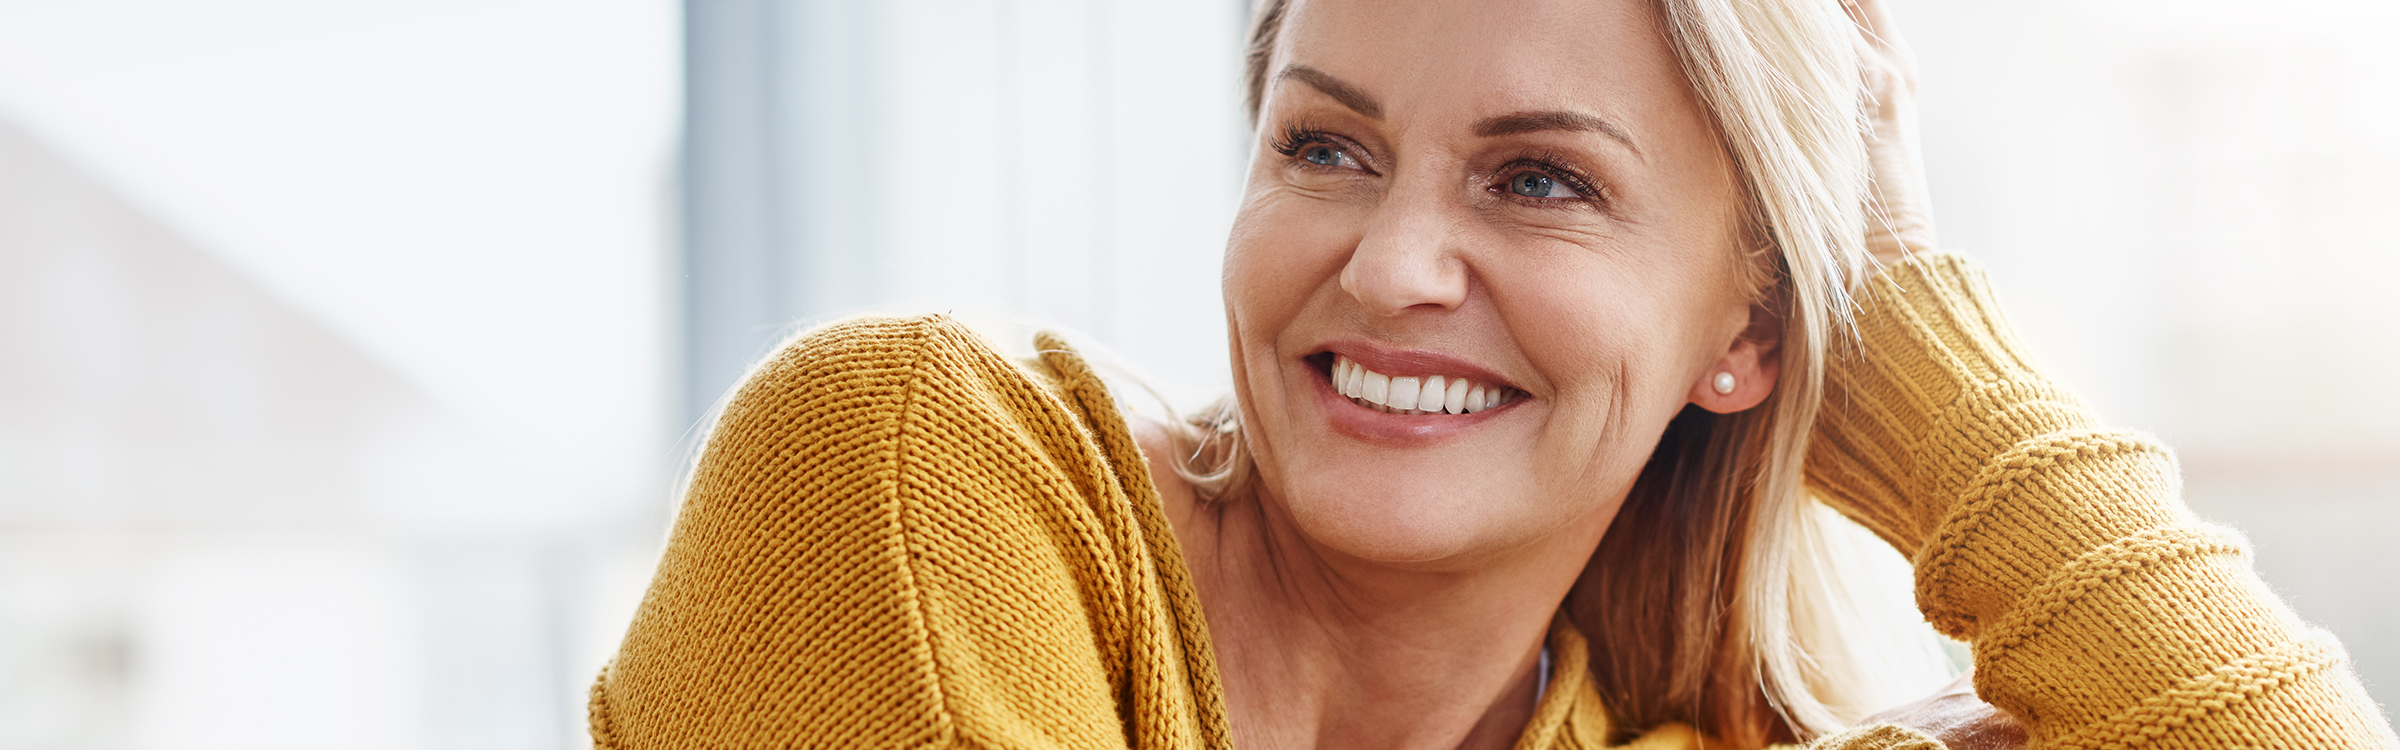 Rousso Adams Facial Plastic Surgery Blog | Dr. Rousso and Dr. Adams Mastering Blepharoplasty